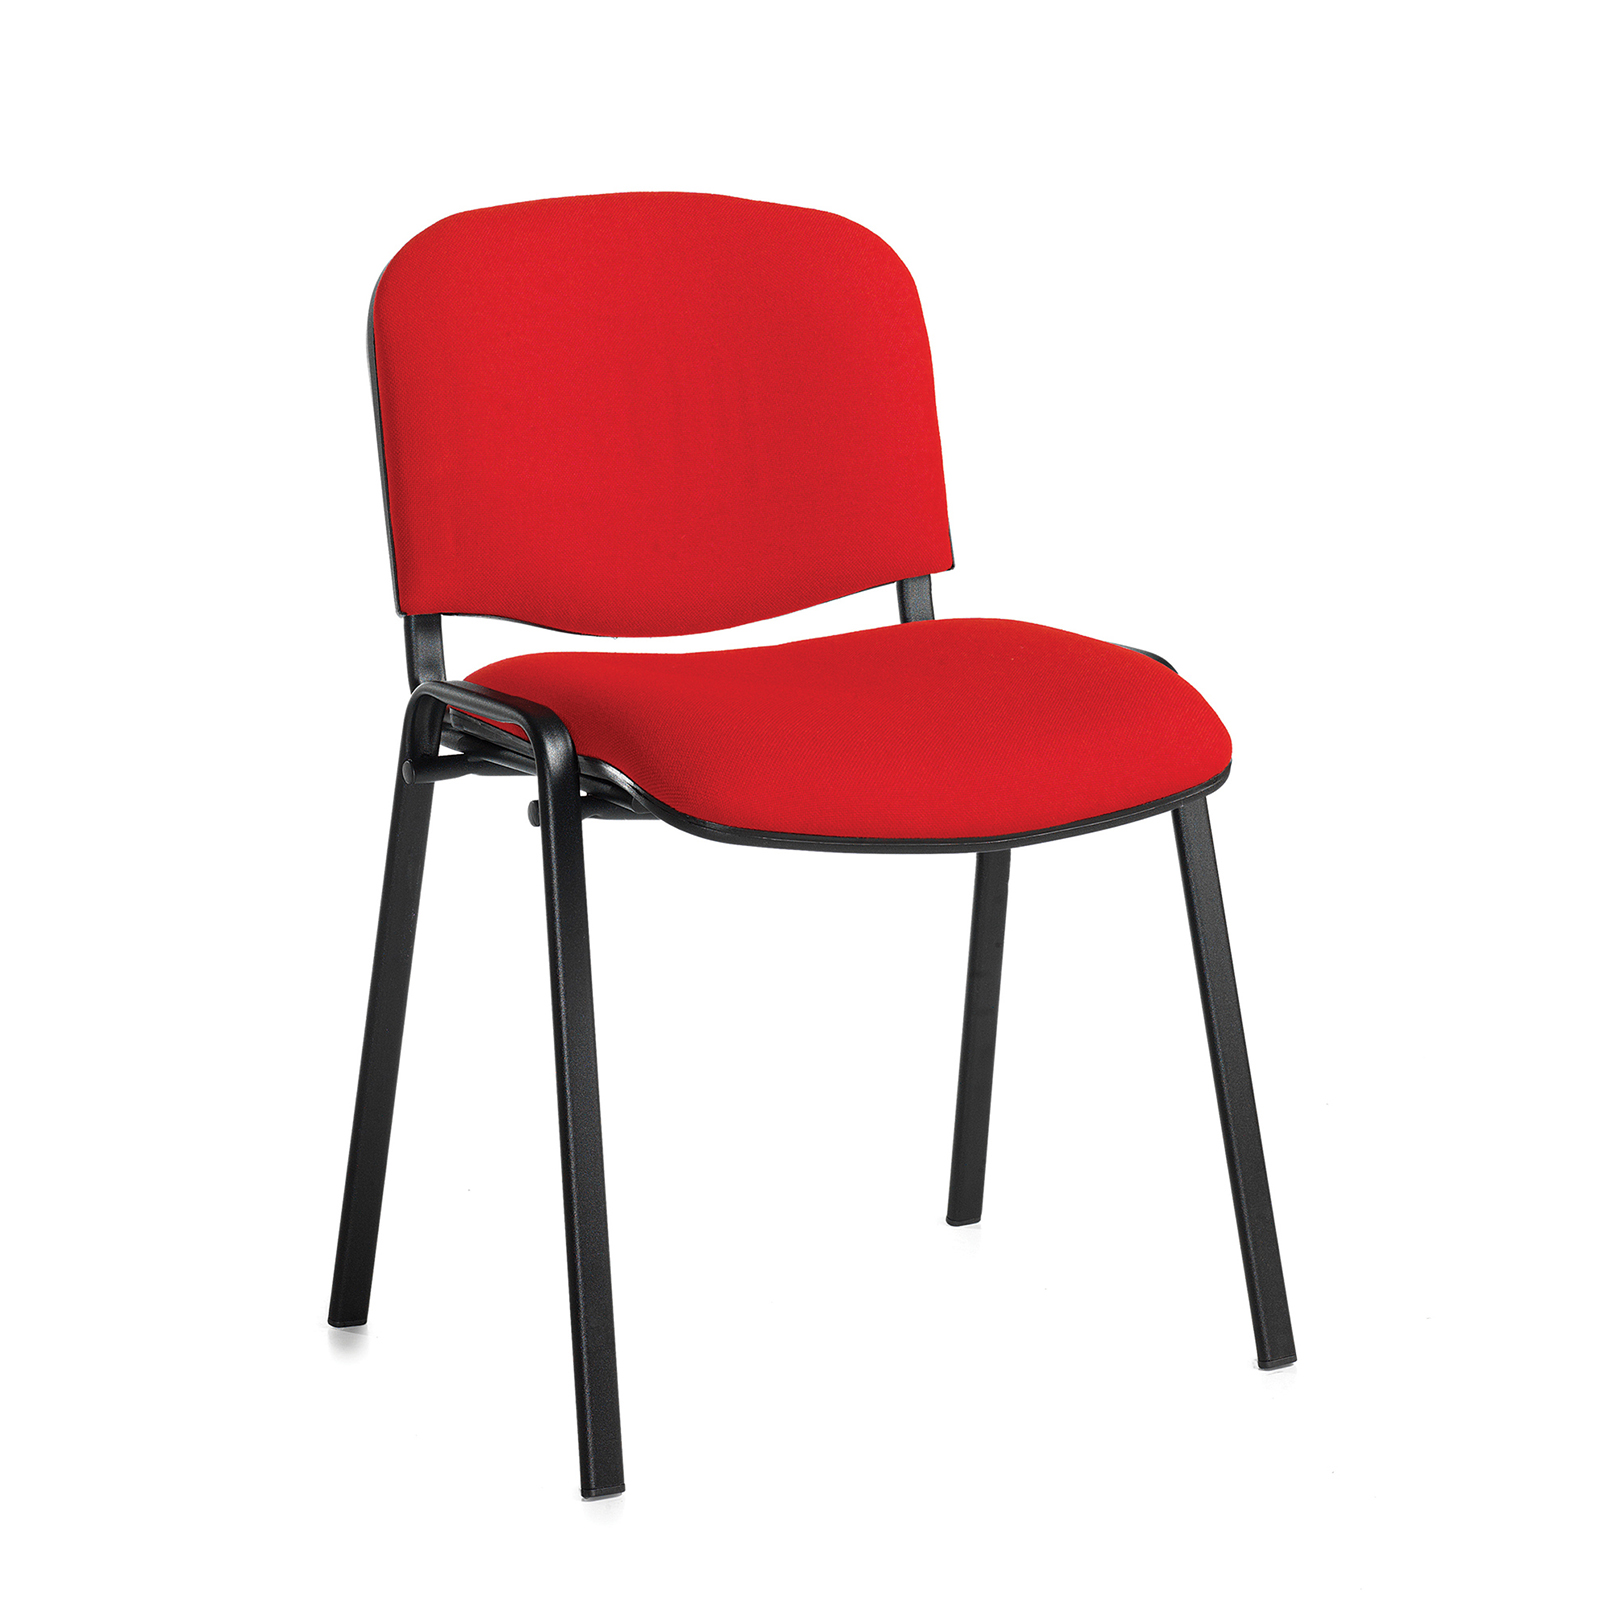 Boardroom / Meeting Taurus meeting room stackable chair with black frame and no arms - red